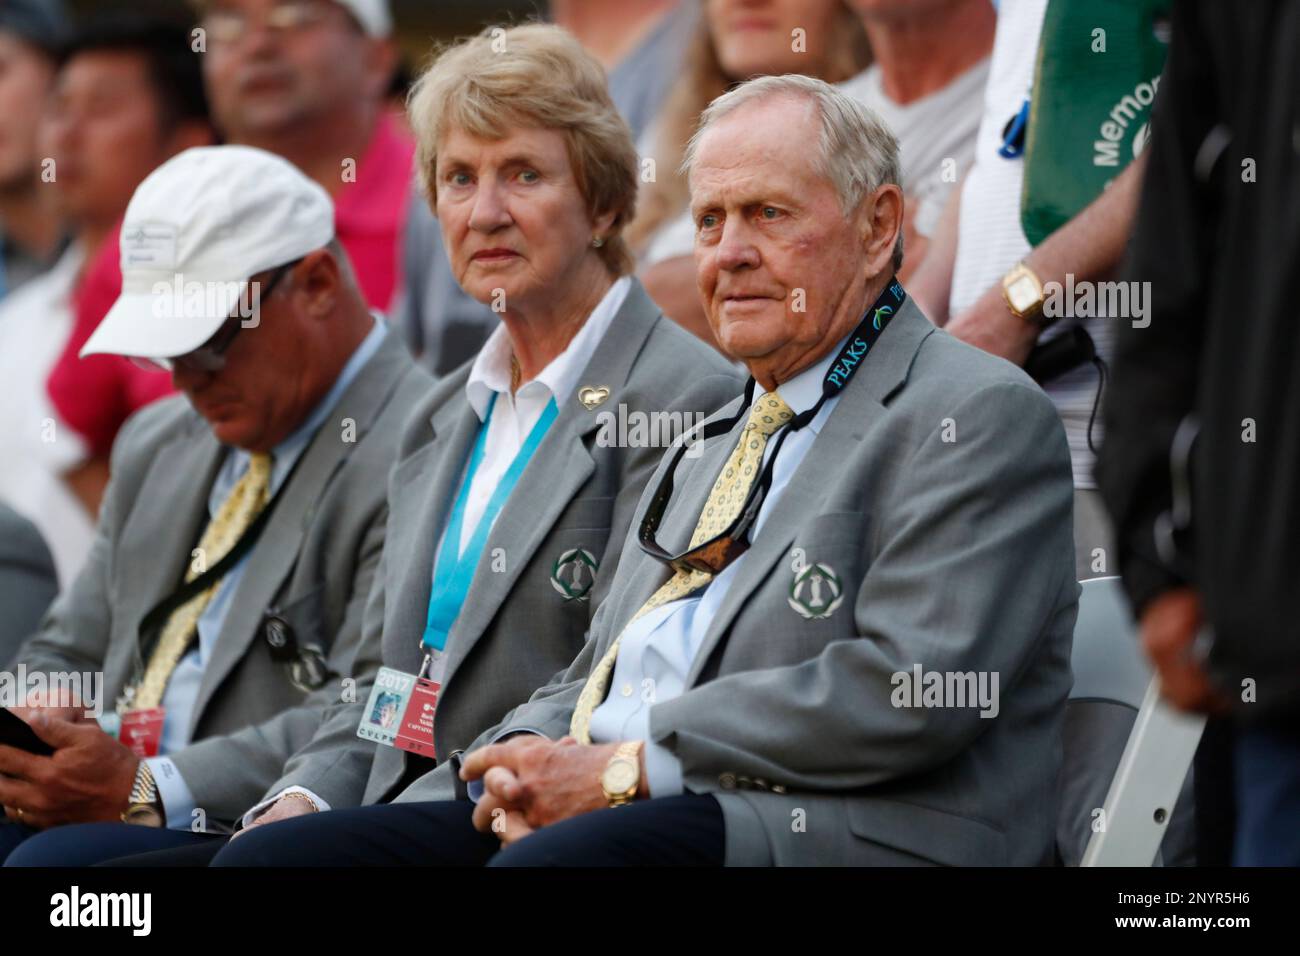 DUBLIN, OH - JUNE 04 Jack Nicklaus and his wife Barbara Nicklaus watch the finish on the 18th hole during the Memorial Tournament